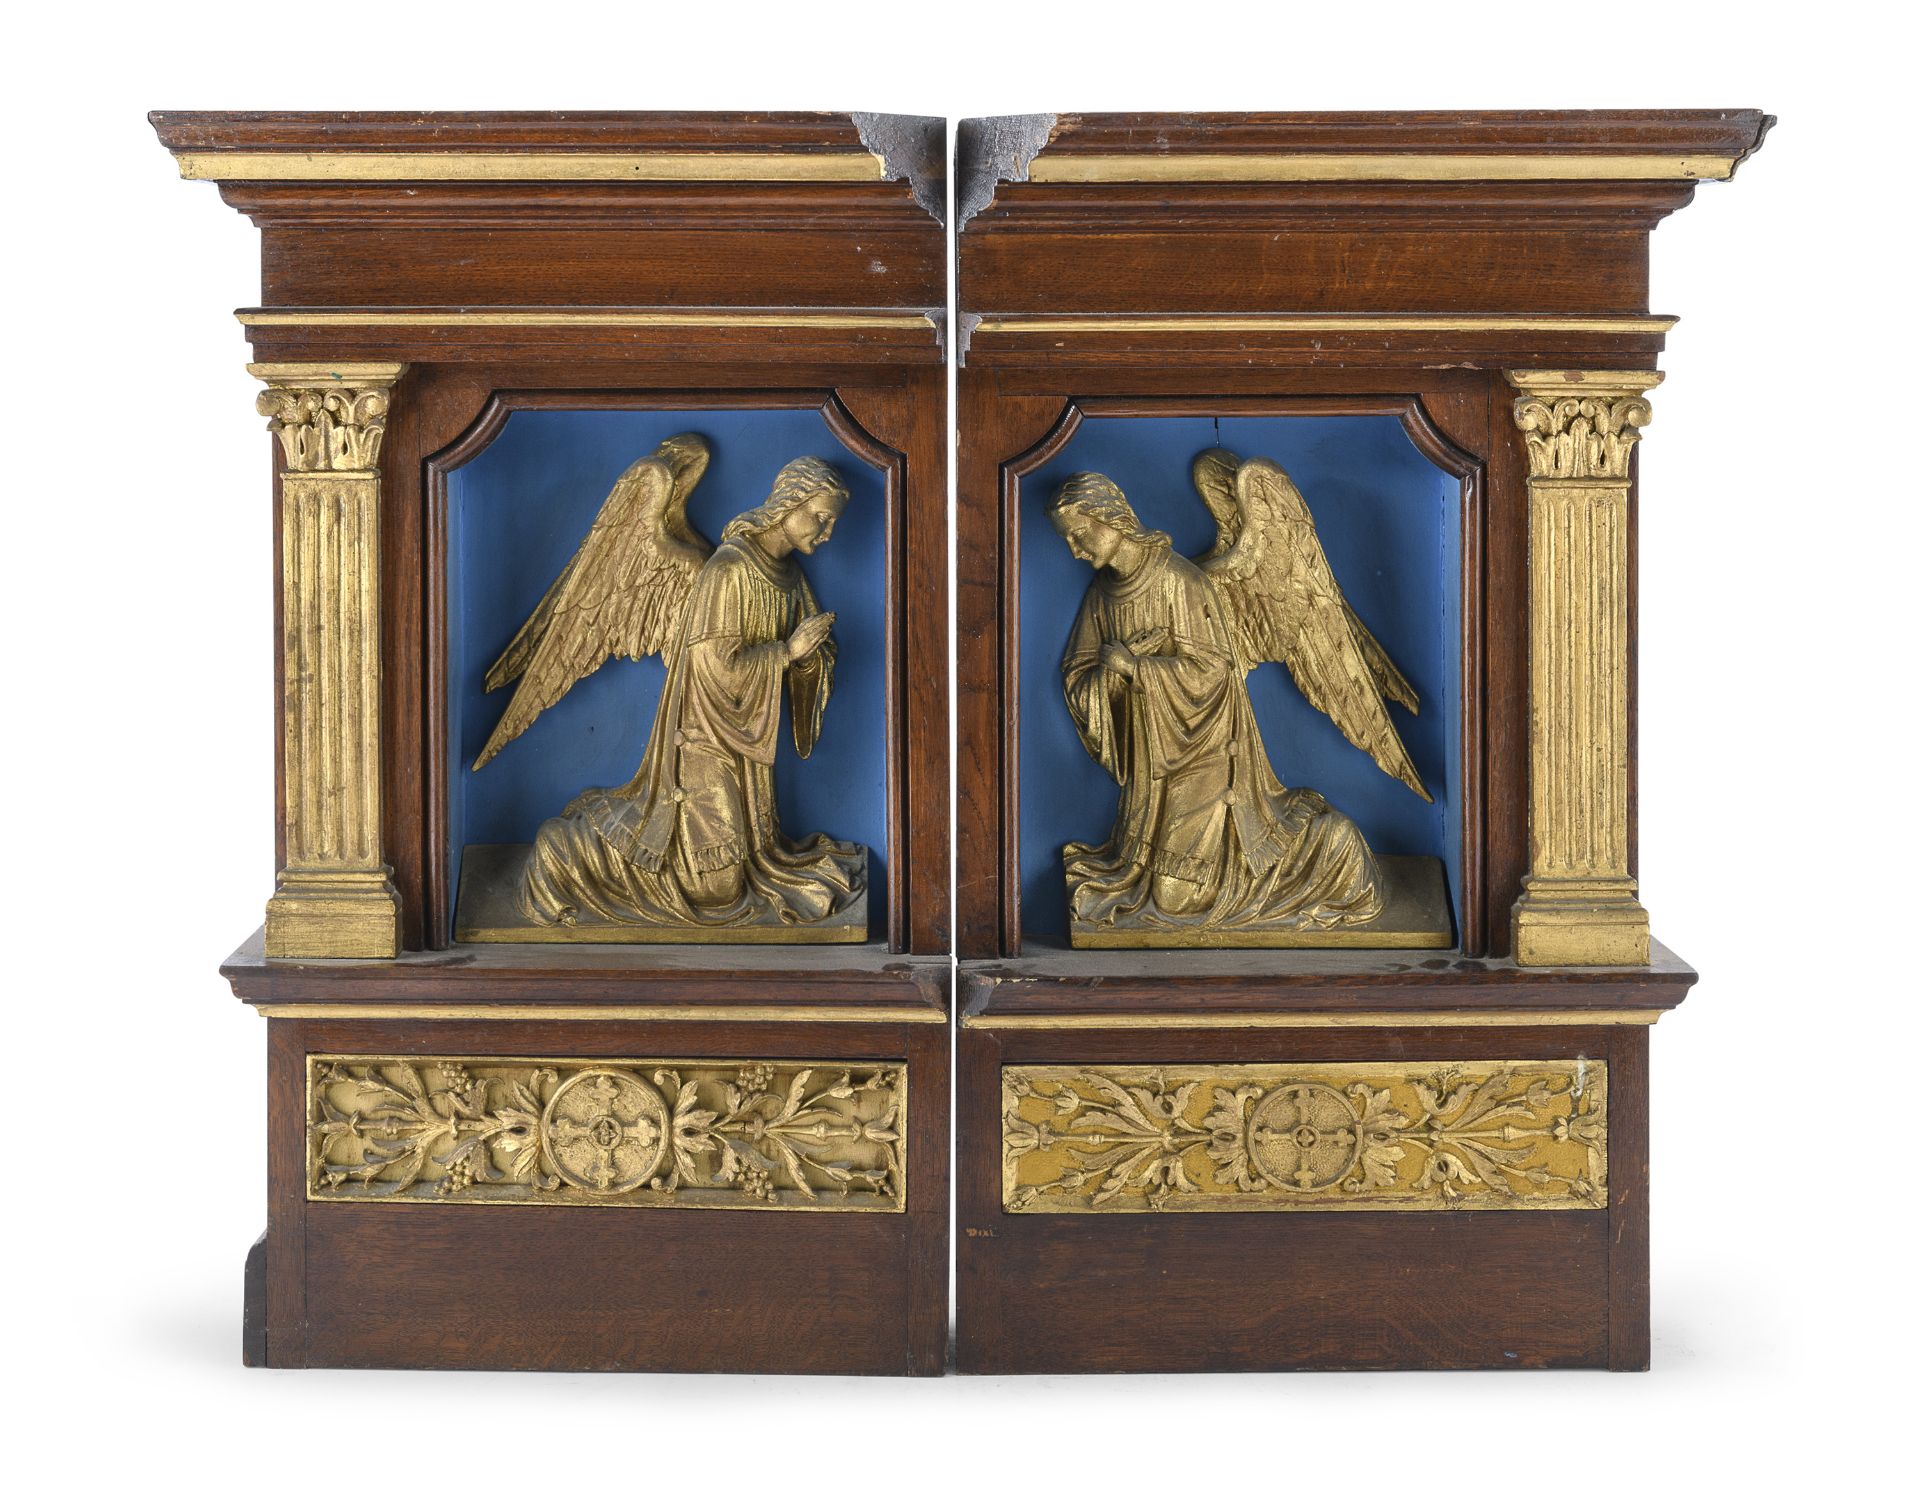 PAIR OF WALNUT NICHES EARLY 19TH CENTURY